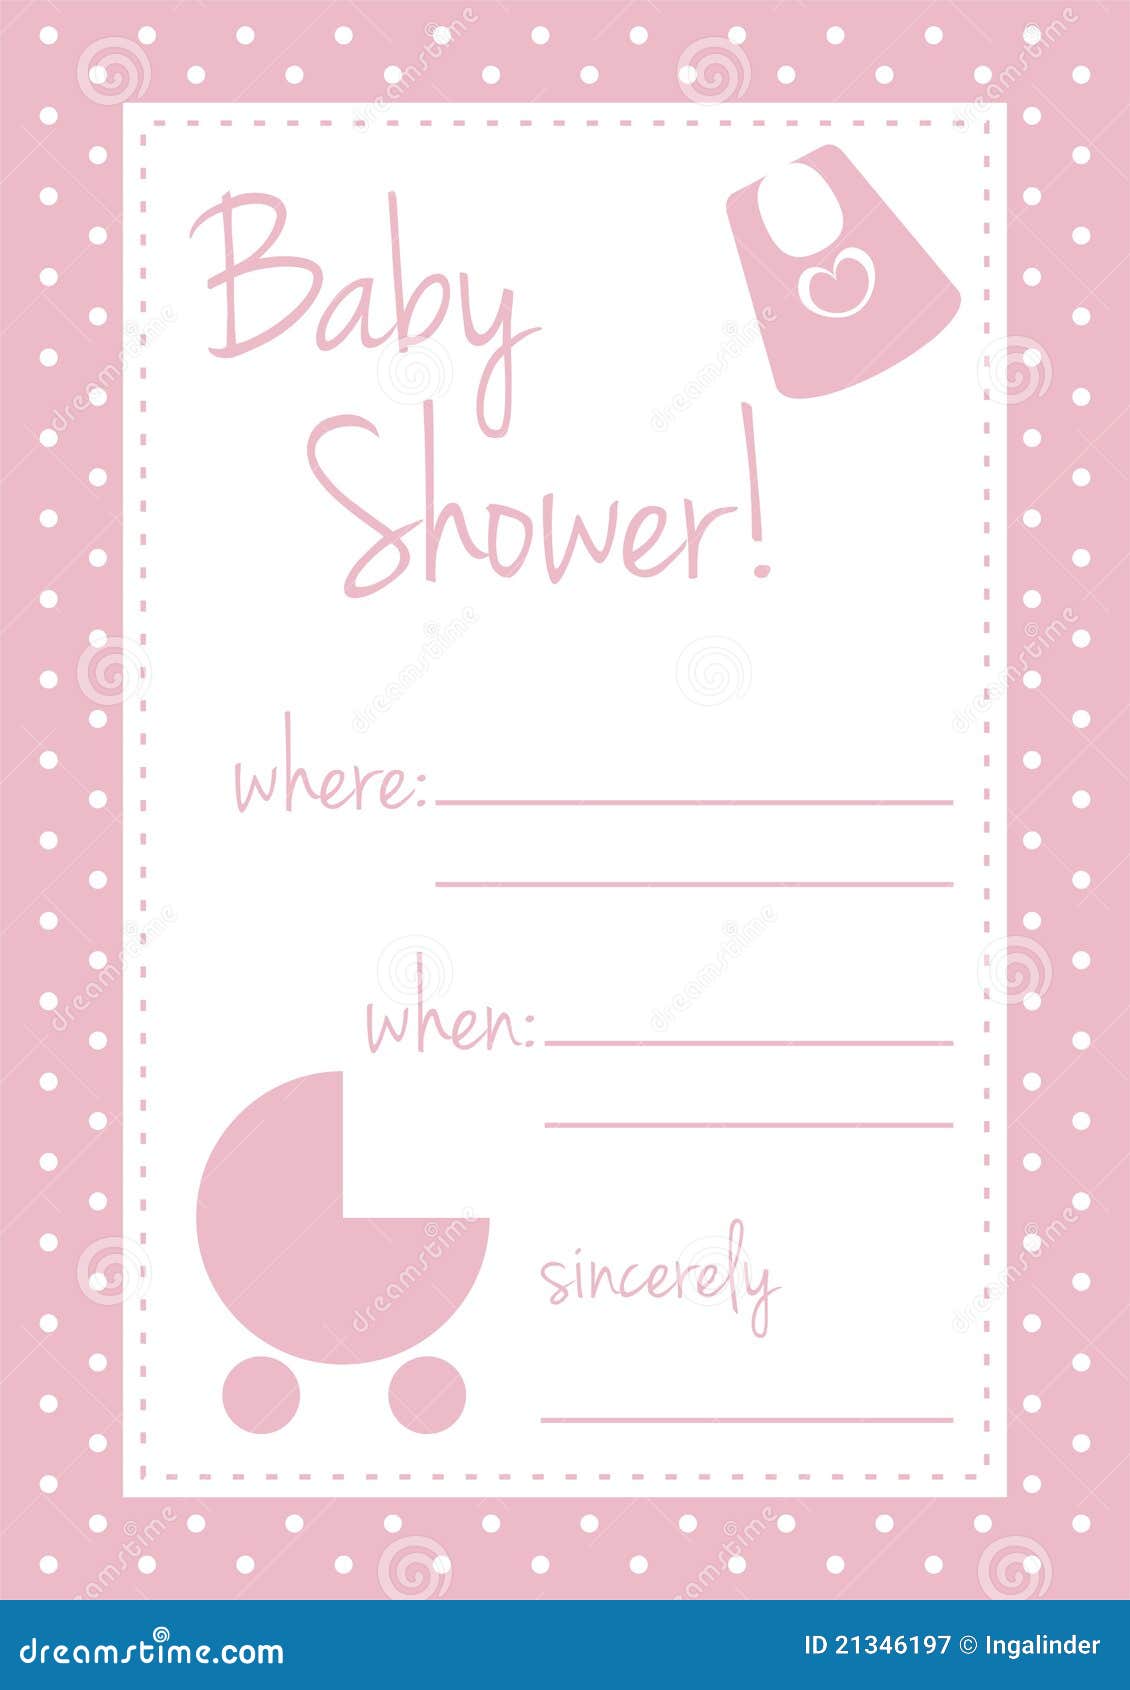 Royalty Free Stock Photography: Baby shower vector card or invitation ...